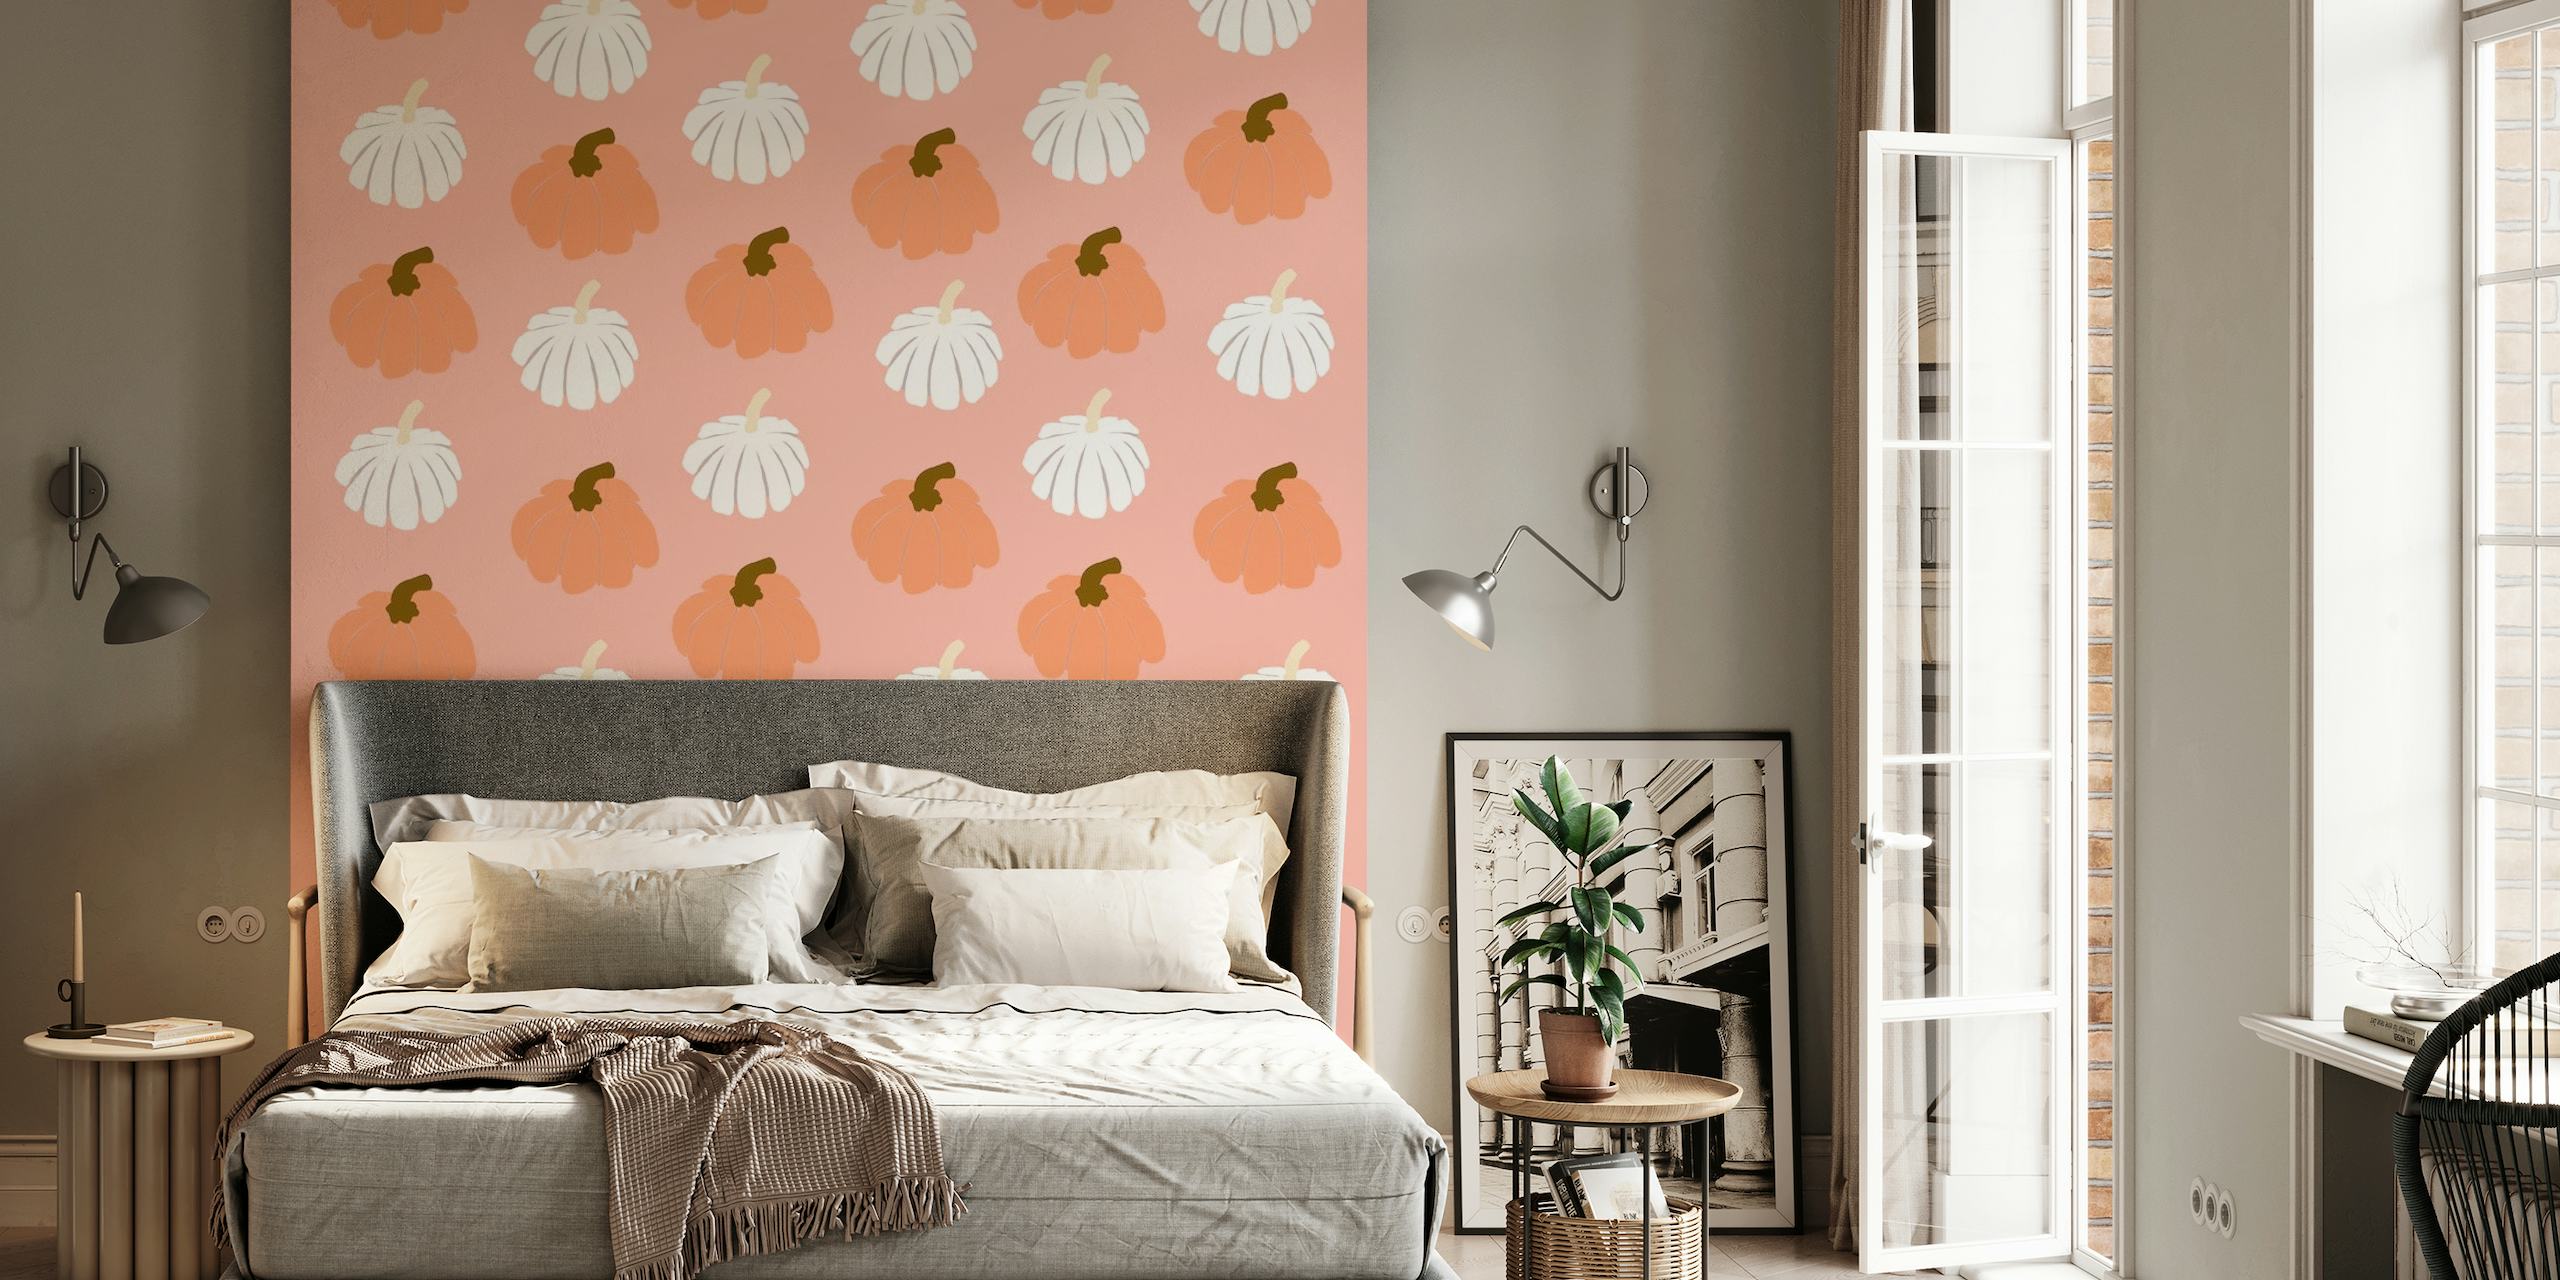 Wall mural with orange and white pumpkins pattern on blush background